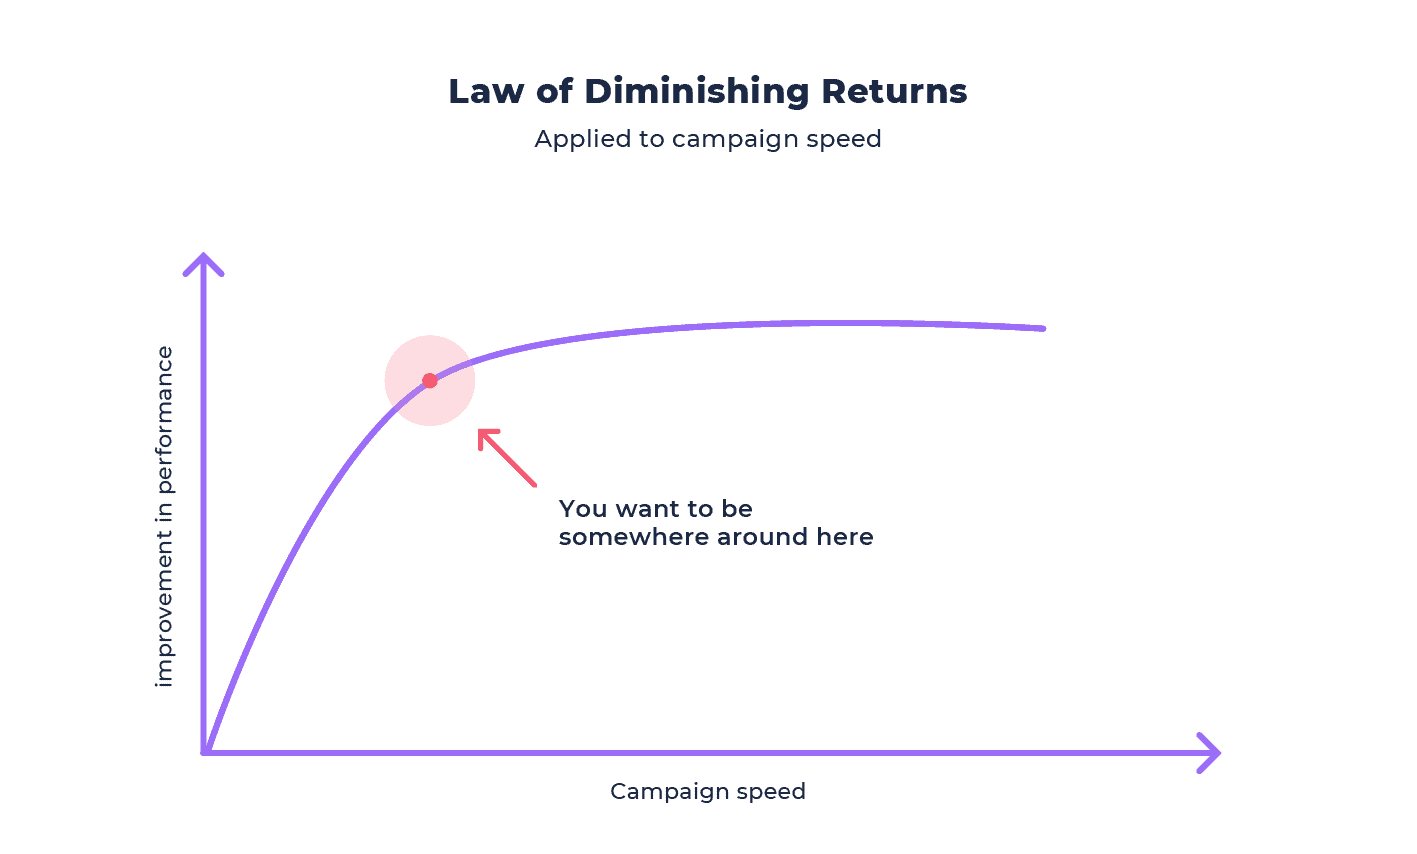 A graph showing how the law of diminishing returns applies to affiliate marketing speed and campaign performance